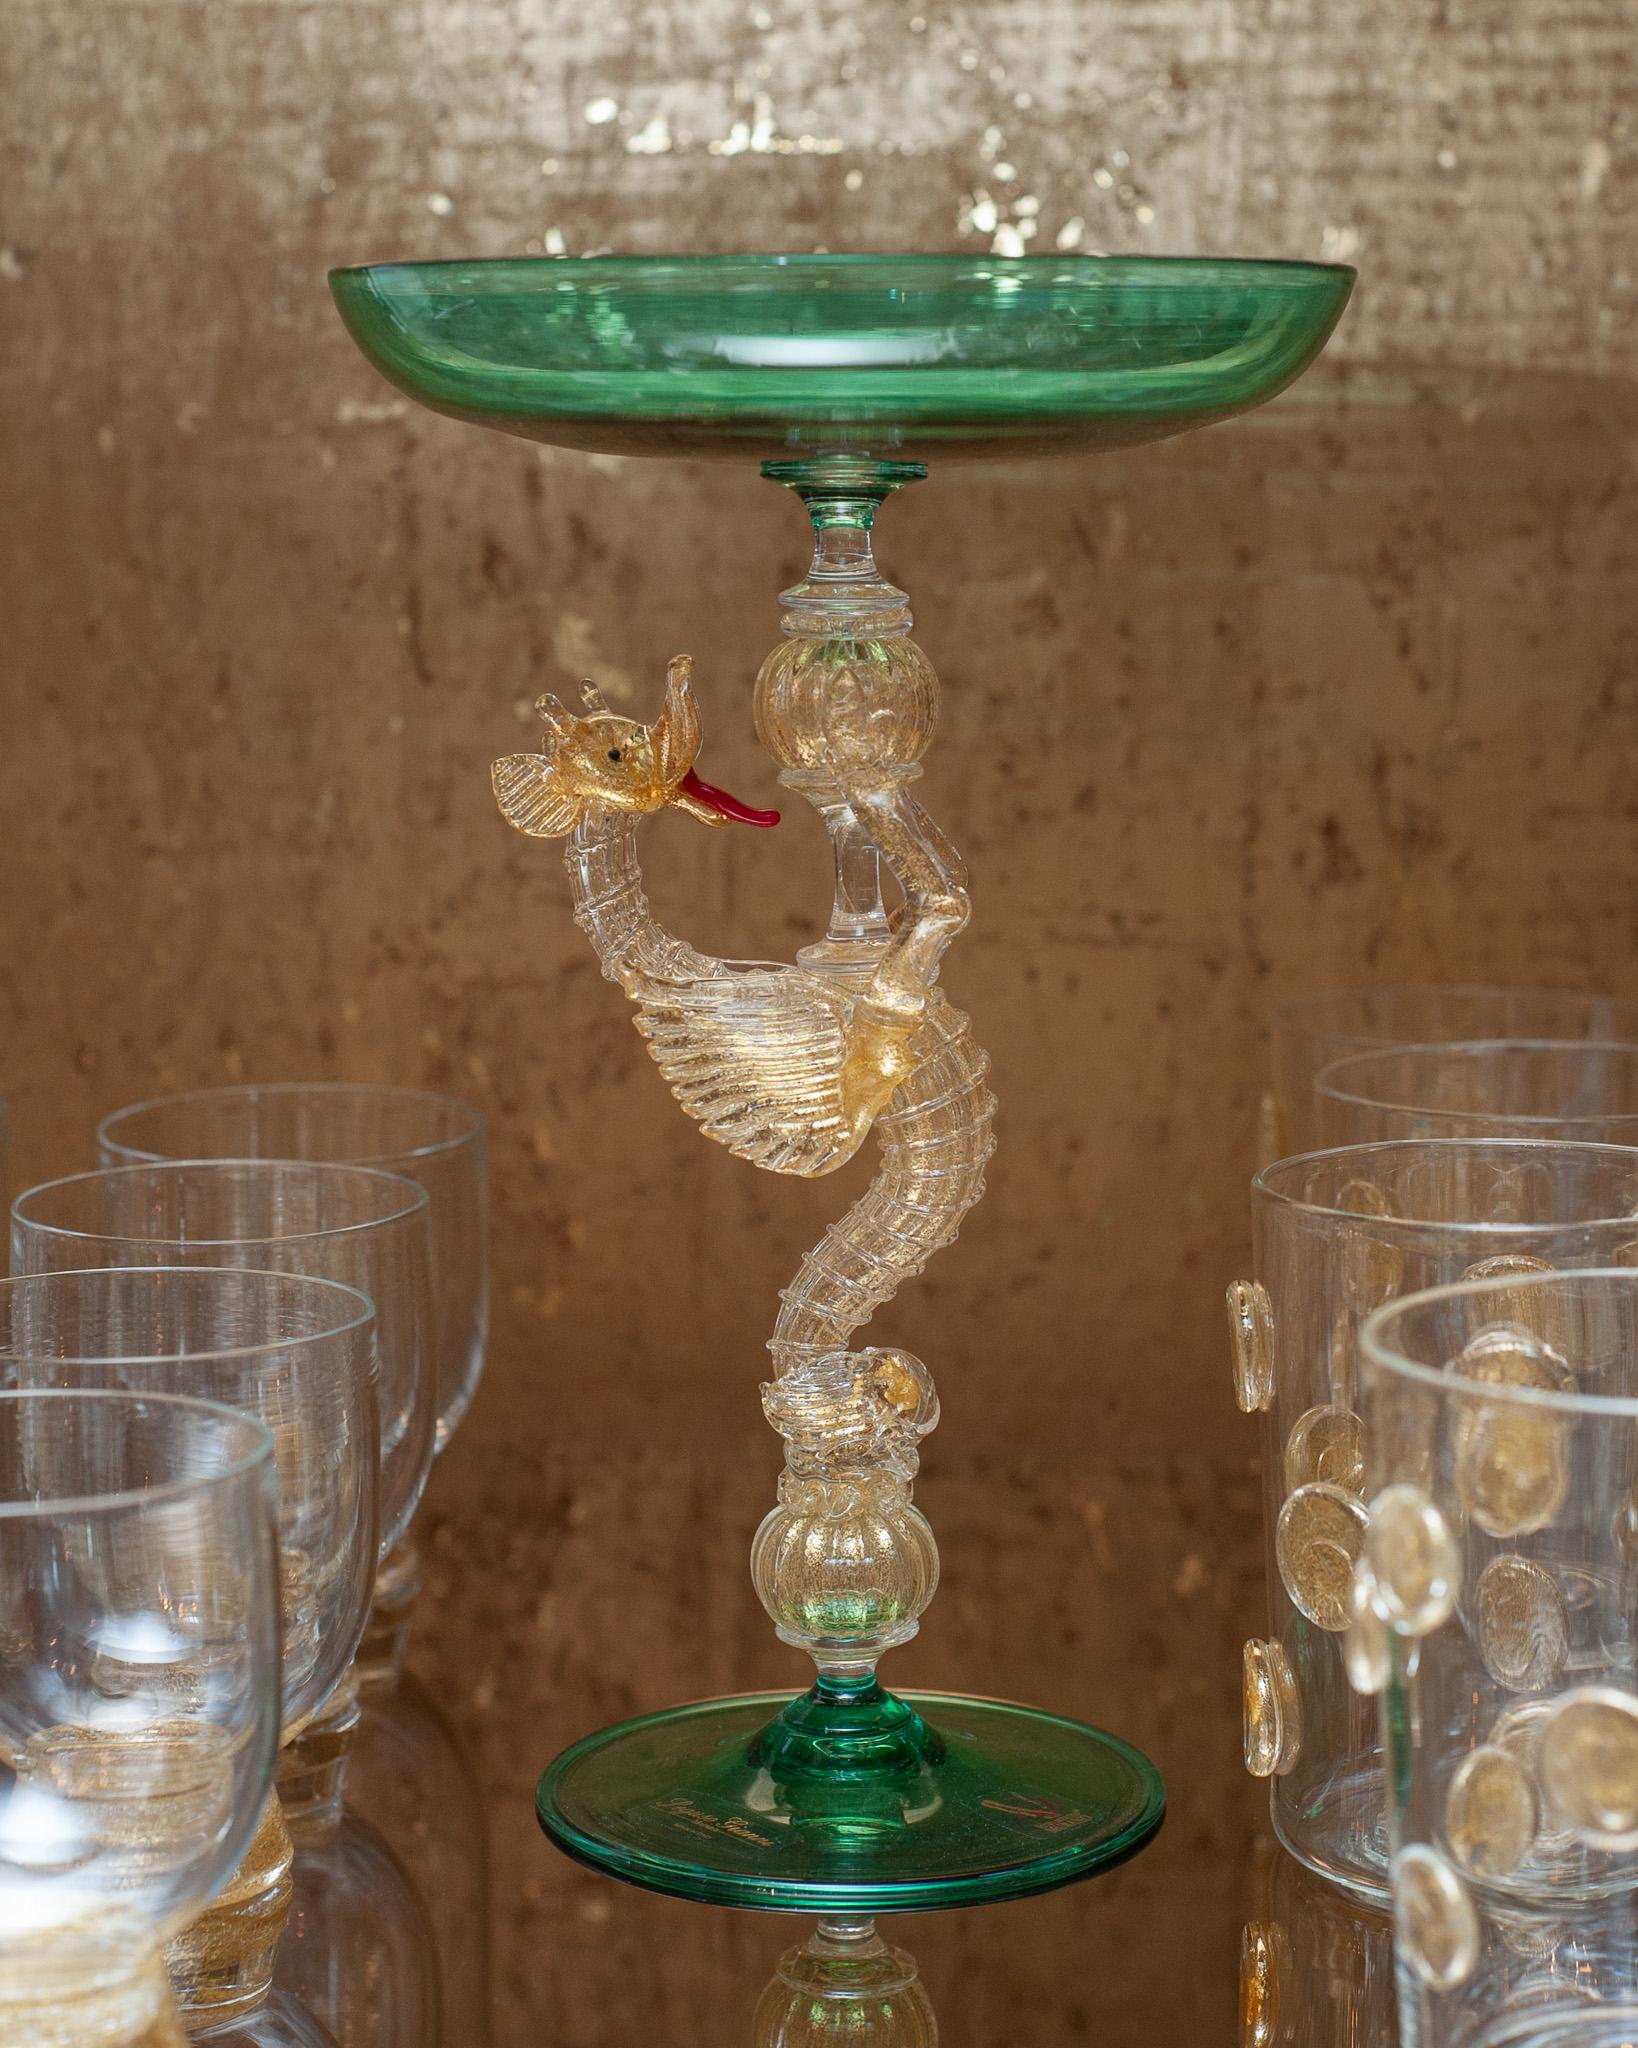 A stunning contemporary hand blown Murano compote with rich blue green coloured bowl and foot, supported by a gold leaf infused dragon. Created by a master glass blower, this footed bowl incorporates fragments of gold leaf to give the piece a warm